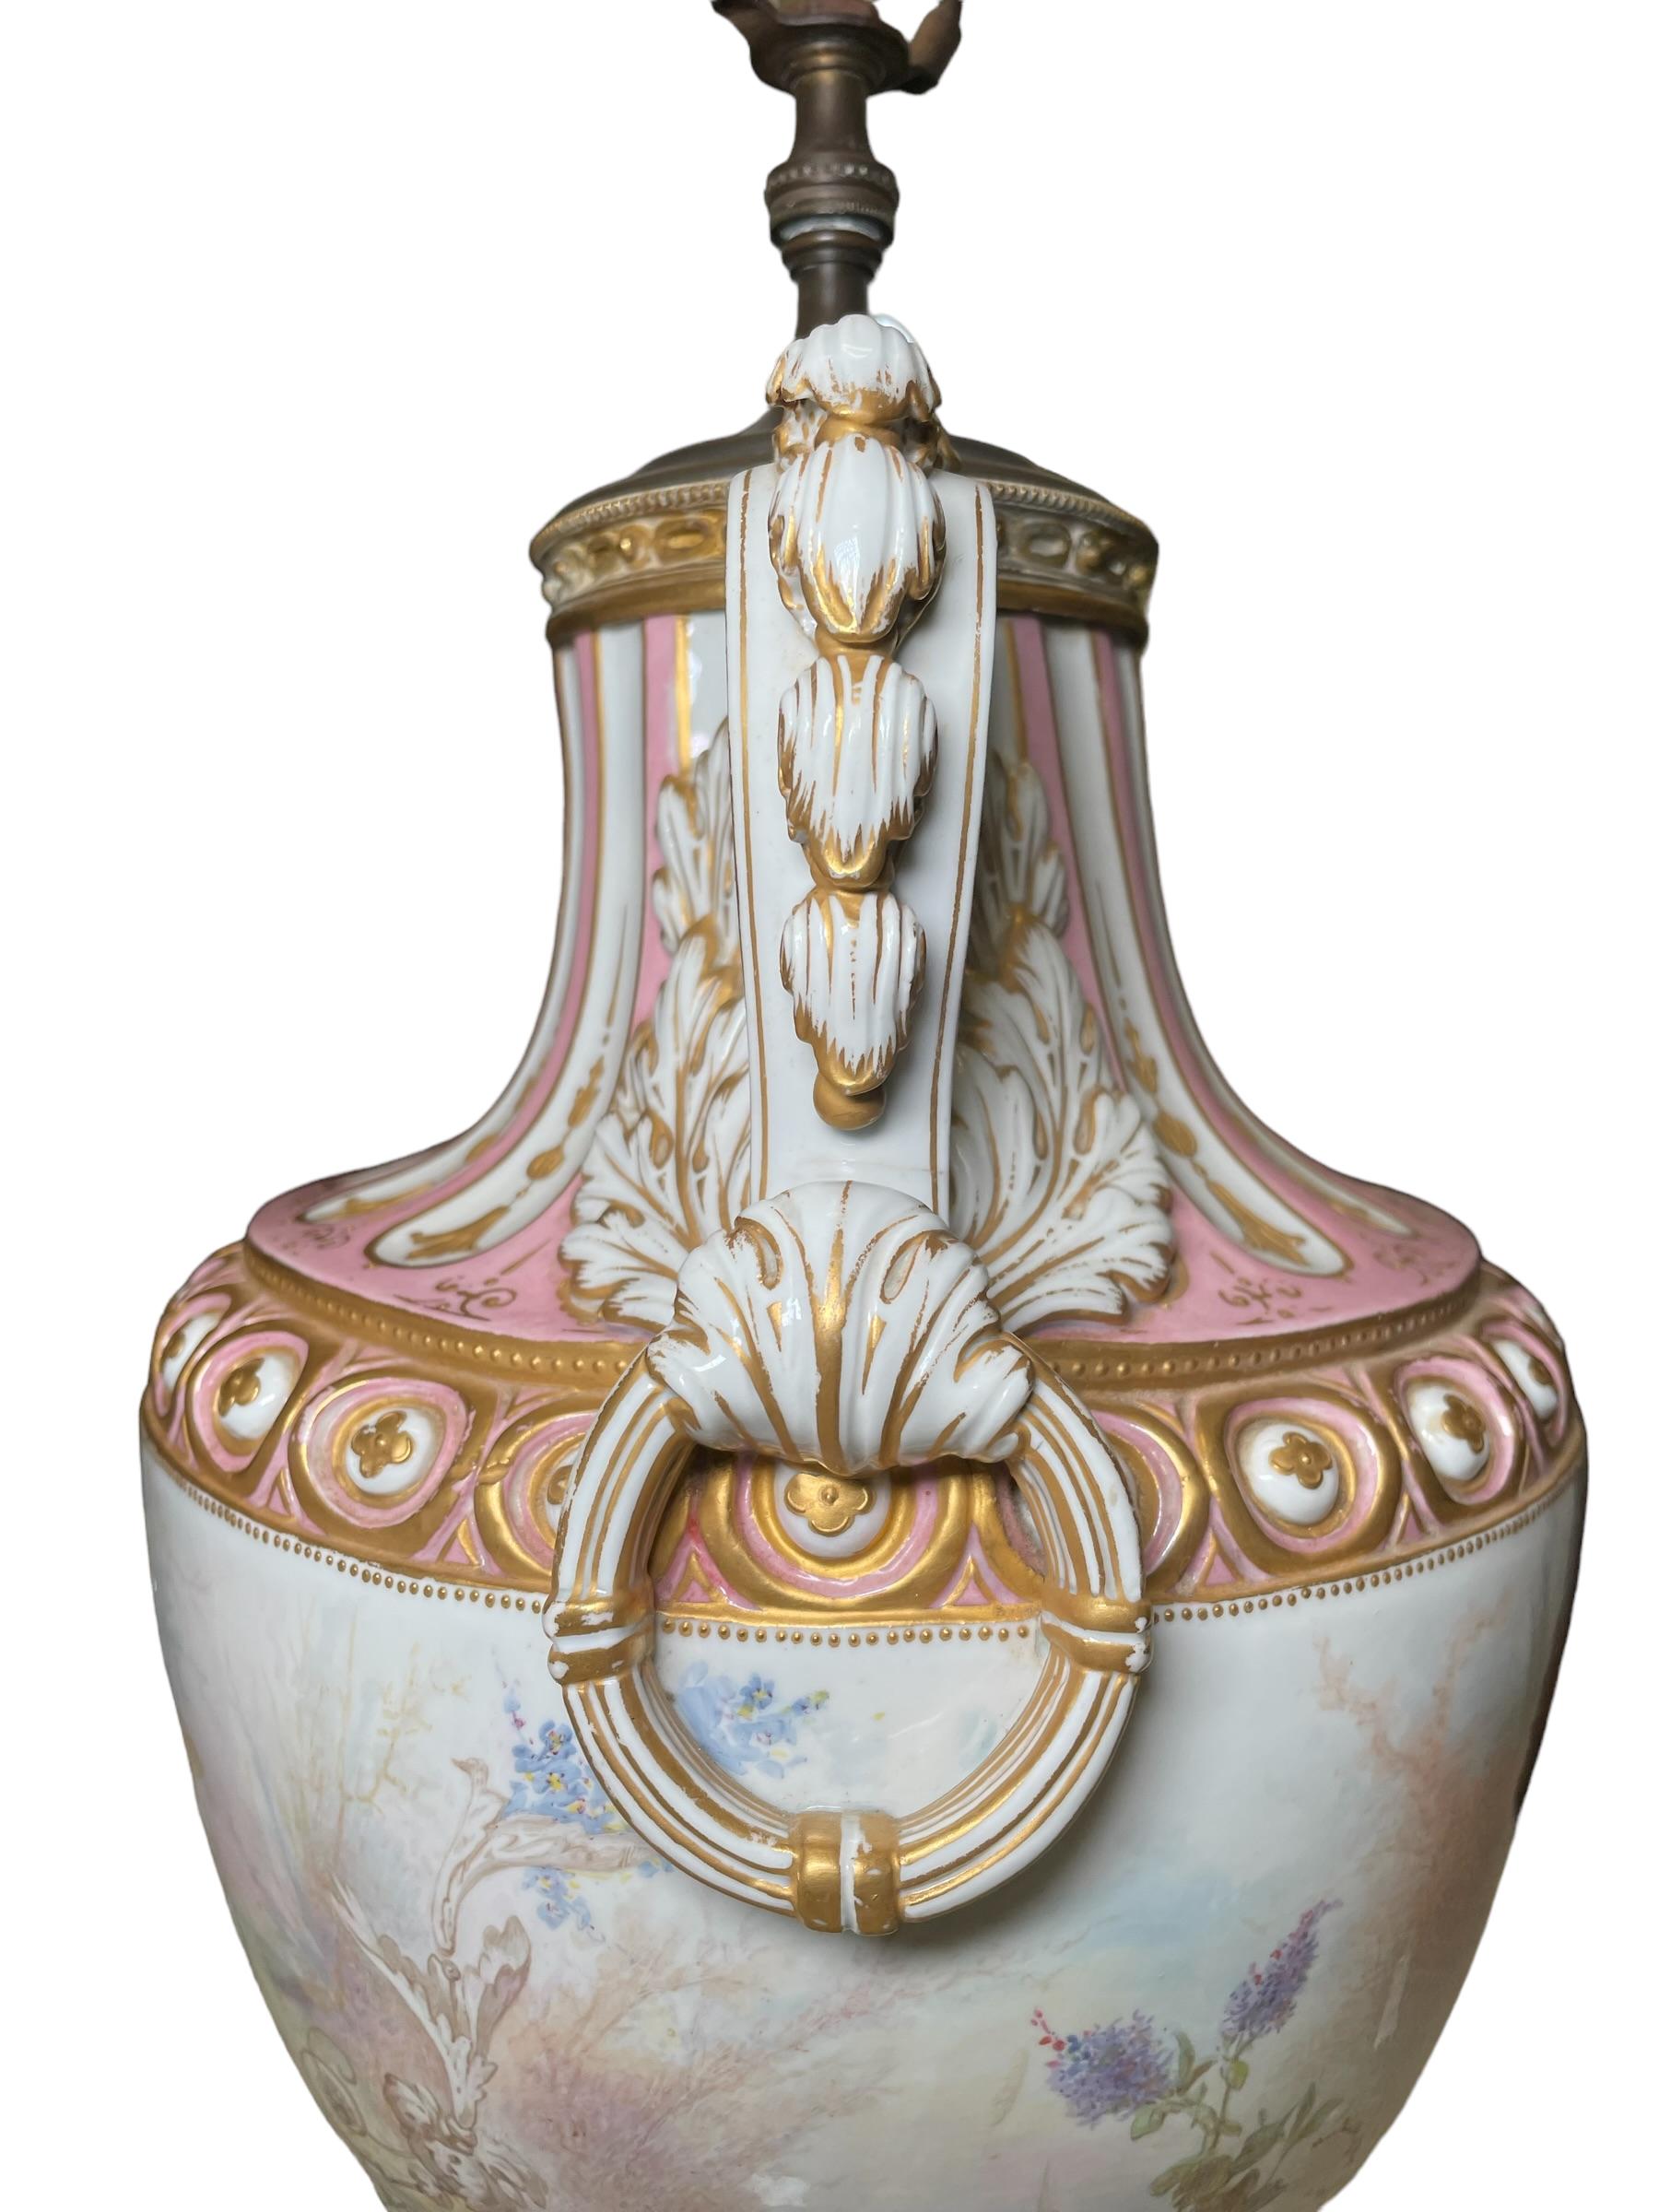 M. Demonceaux Sevres Style Porcelain Bronze Mounted Urn Table Lamp For Sale 9